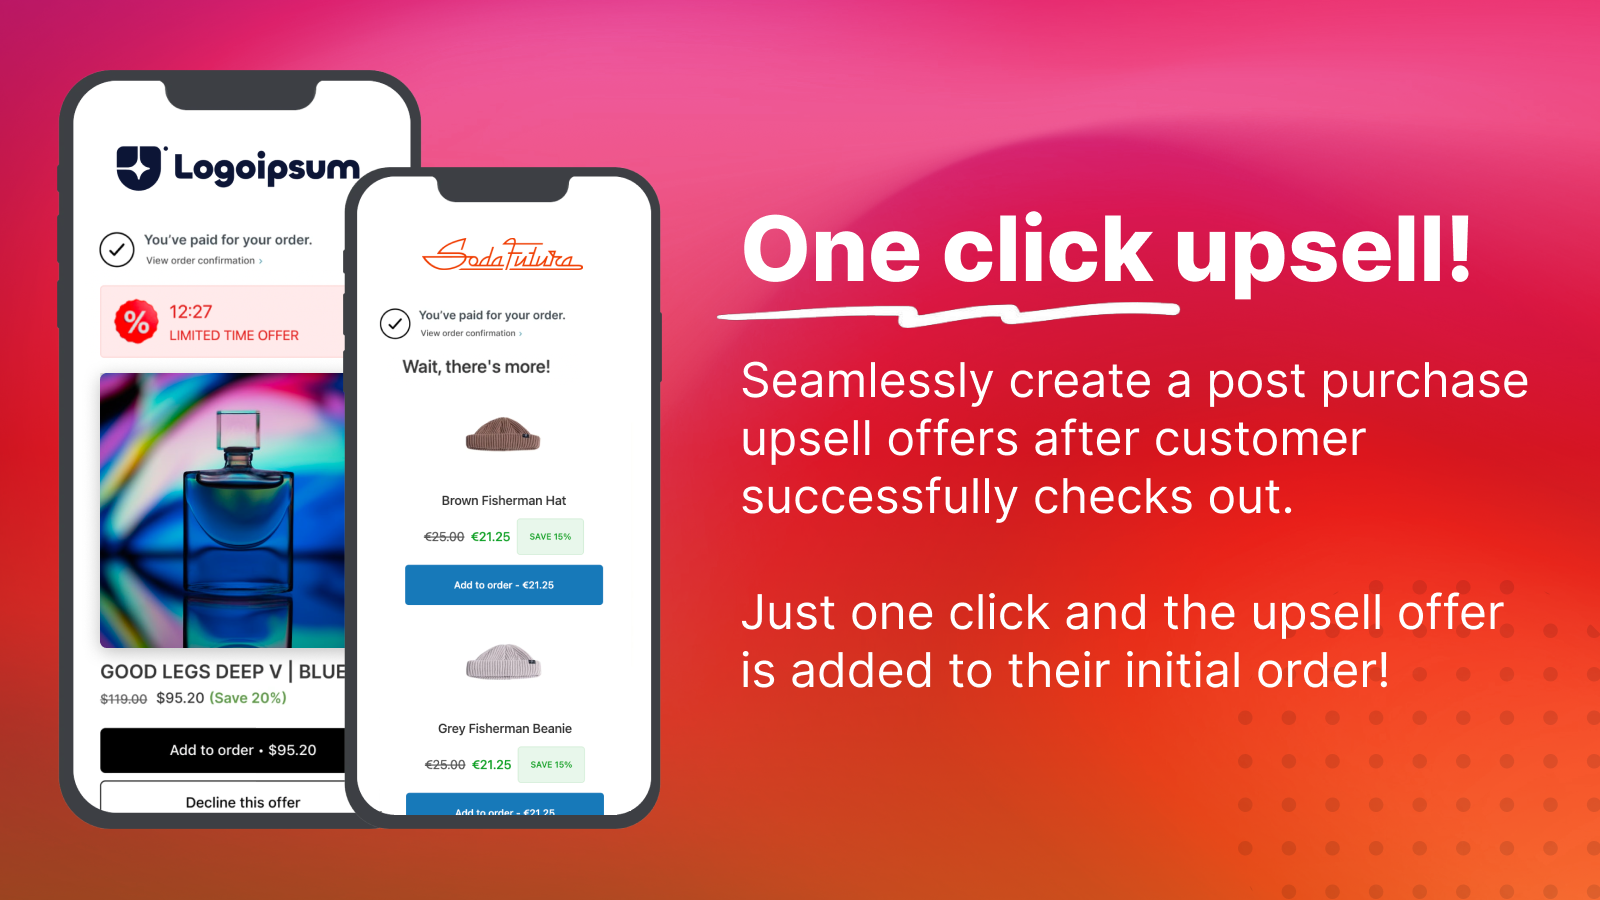 One click upsell!